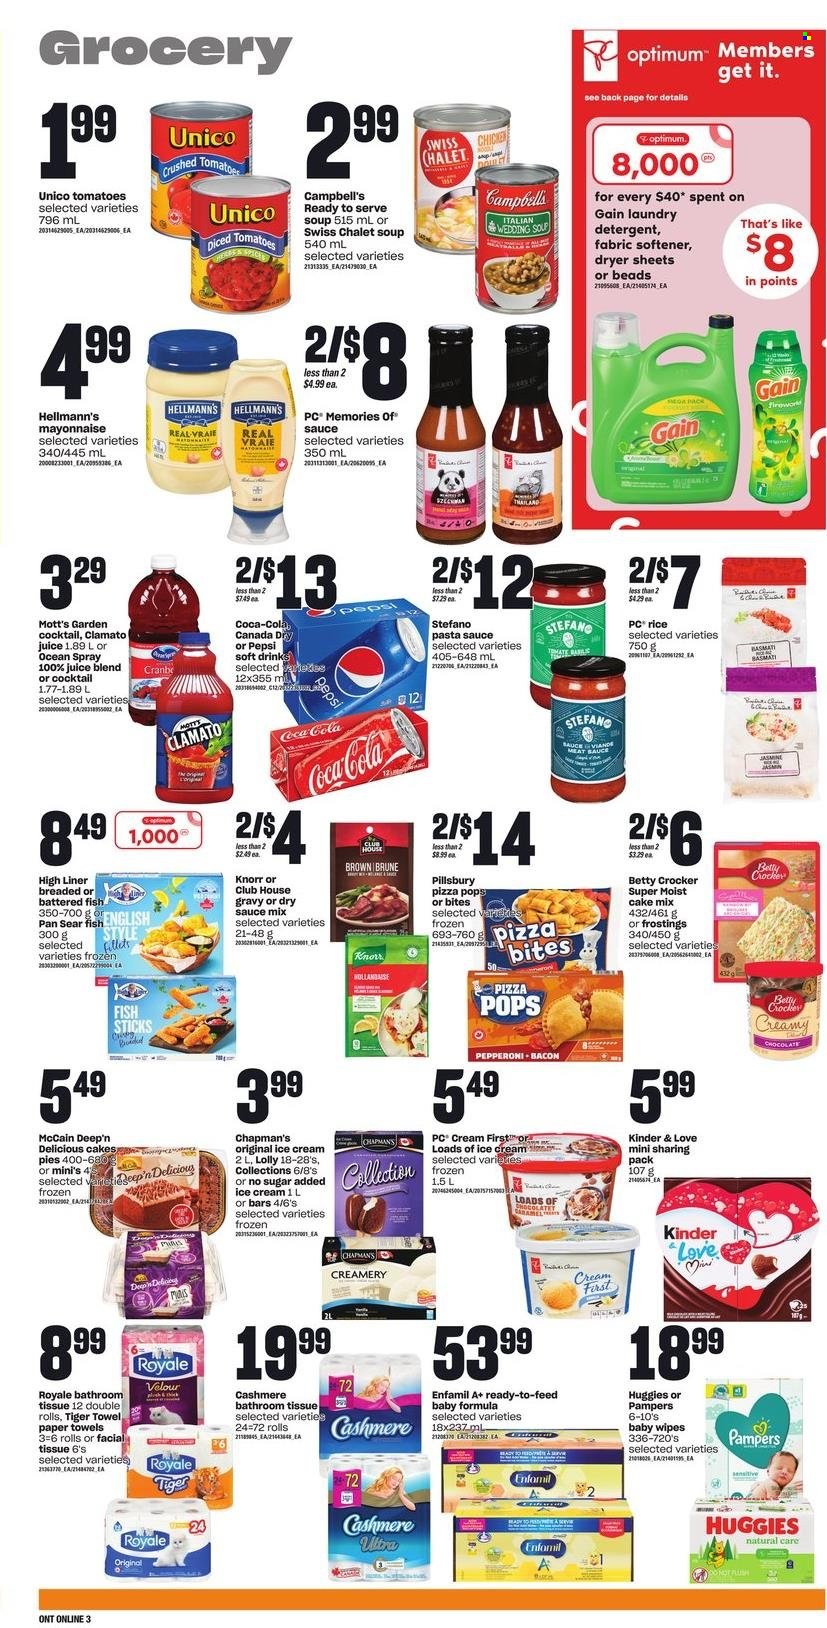 thumbnail - Zehrs Flyer - February 02, 2023 - February 08, 2023 - Sales products - cake mix, Mott's, fish fillets, fish, fish fingers, fish sticks, Campbell's, pizza, pasta sauce, soup, sauce, Pillsbury, bacon, ham, pepperoni, mayonnaise, Hellmann’s, ice cream, McCain, lollipop, crushed tomatoes, diced tomatoes, basmati rice, rice, caramel, Canada Dry, Coca-Cola, Pepsi, juice, Clamato, soft drink, Enfamil, wipes, Pampers, baby wipes, bath tissue, kitchen towels, paper towels, Gain, fabric softener, dryer sheets, basket, pan, Optimum, detergent, Huggies, Knorr. Page 9.